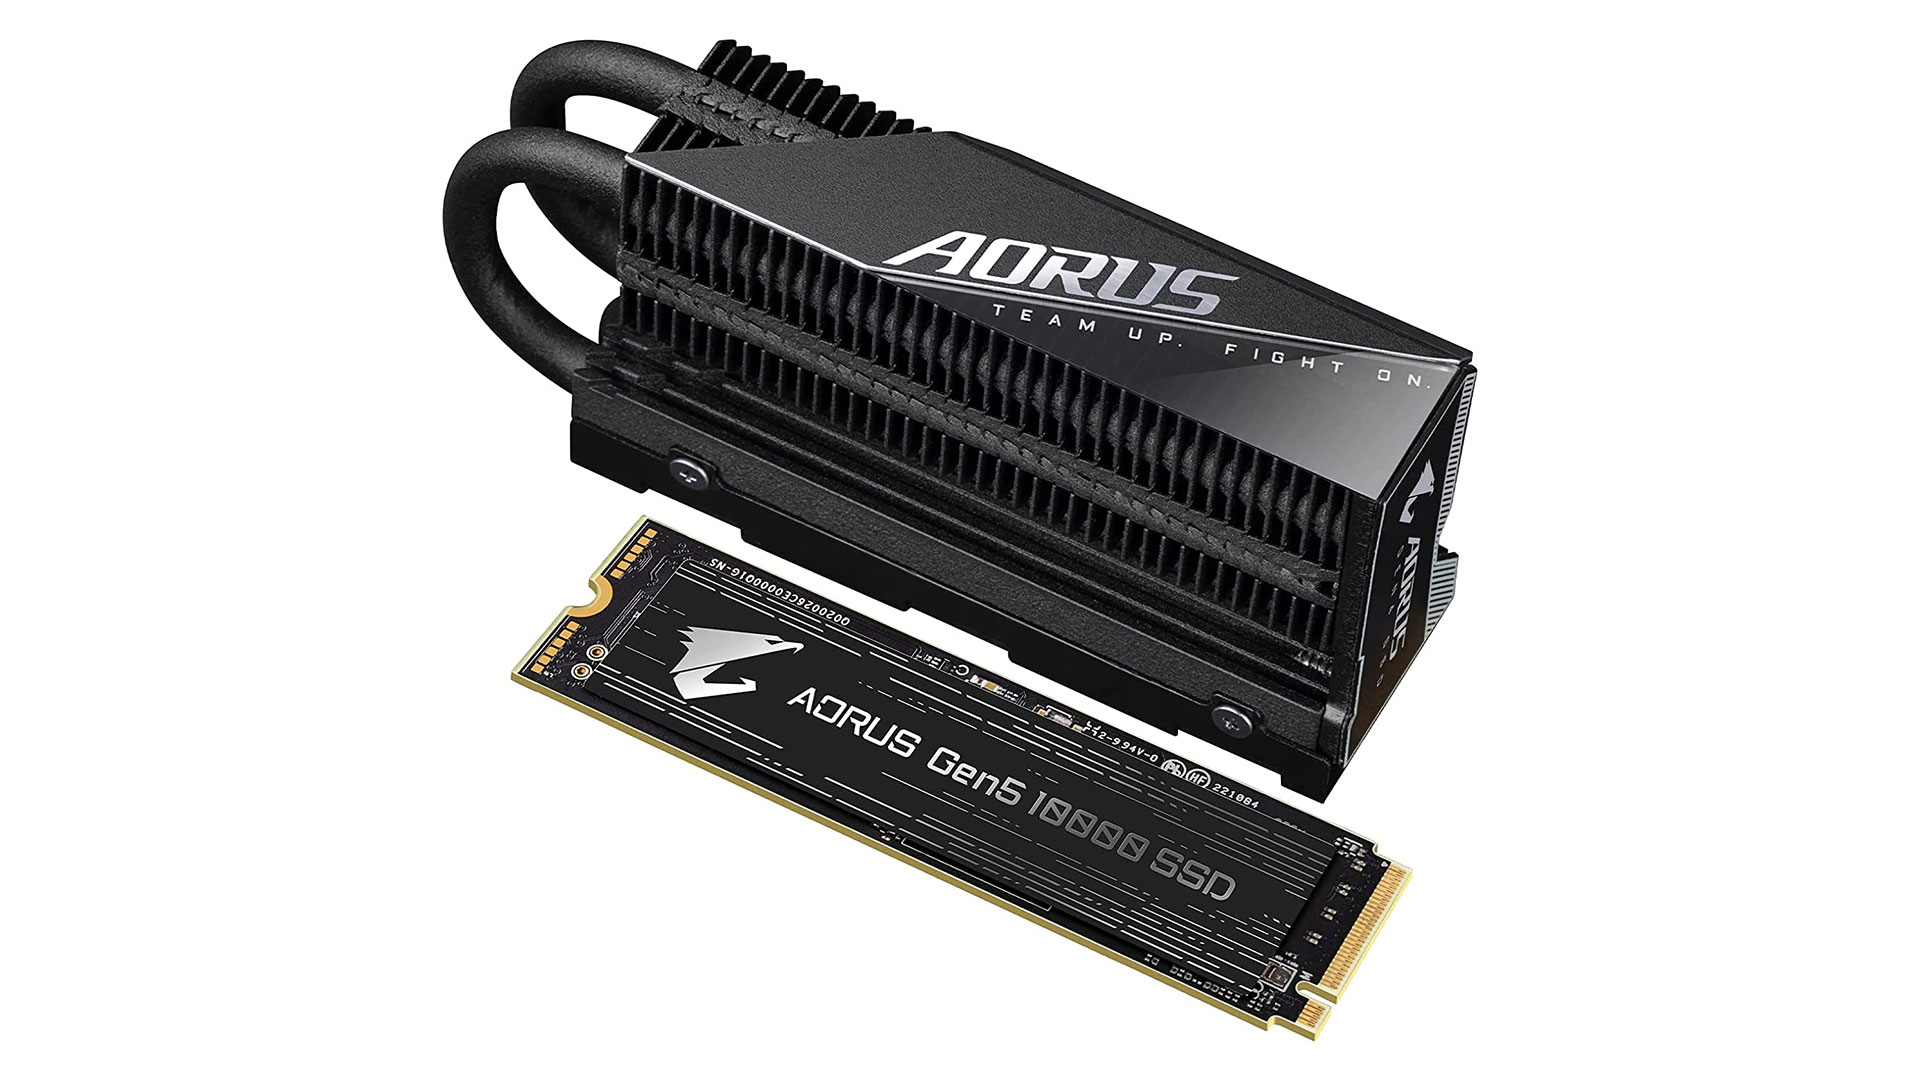 Next Gen PCIe Gen 5 NVMe M.2 SSDs Explained with @crucial & ASUS